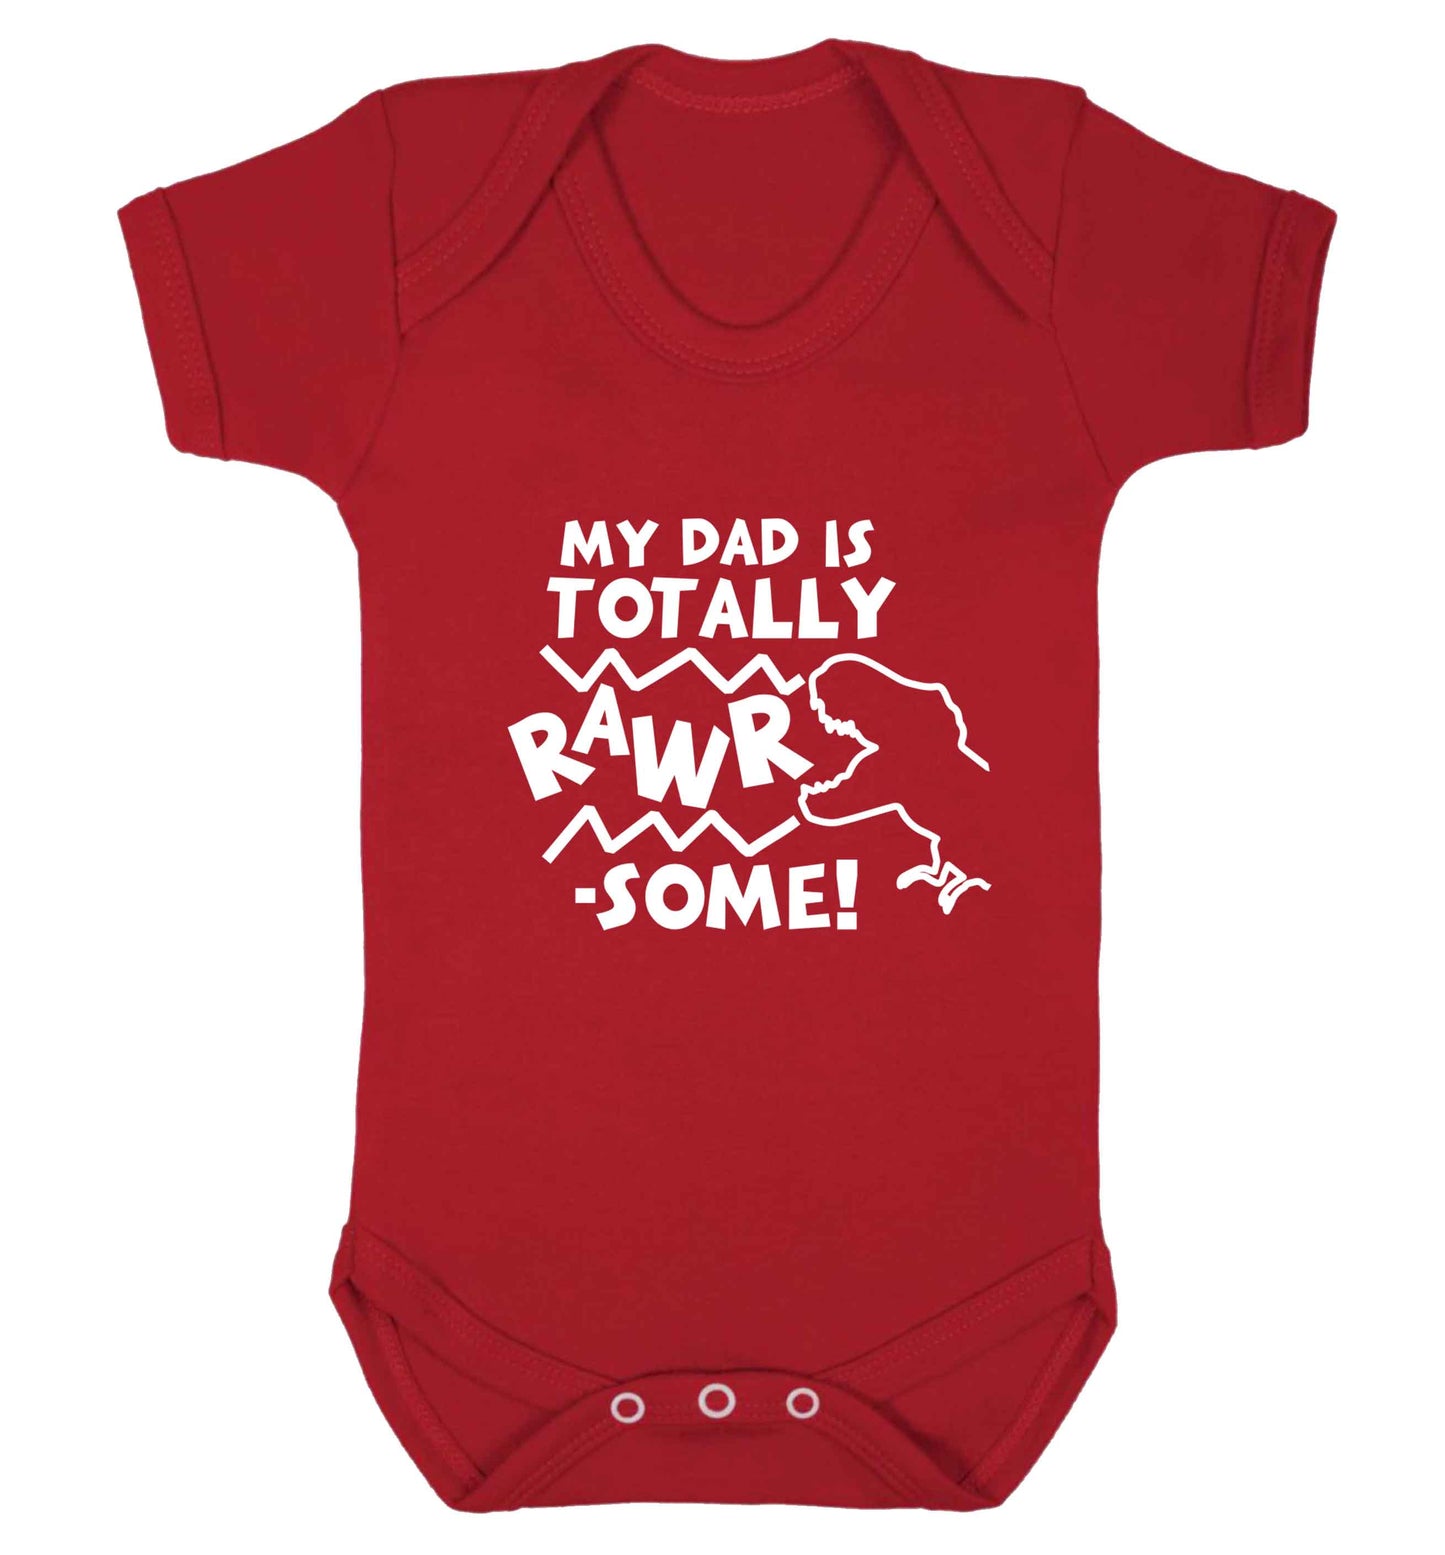 My dad is totally rawrsome baby vest red 18-24 months